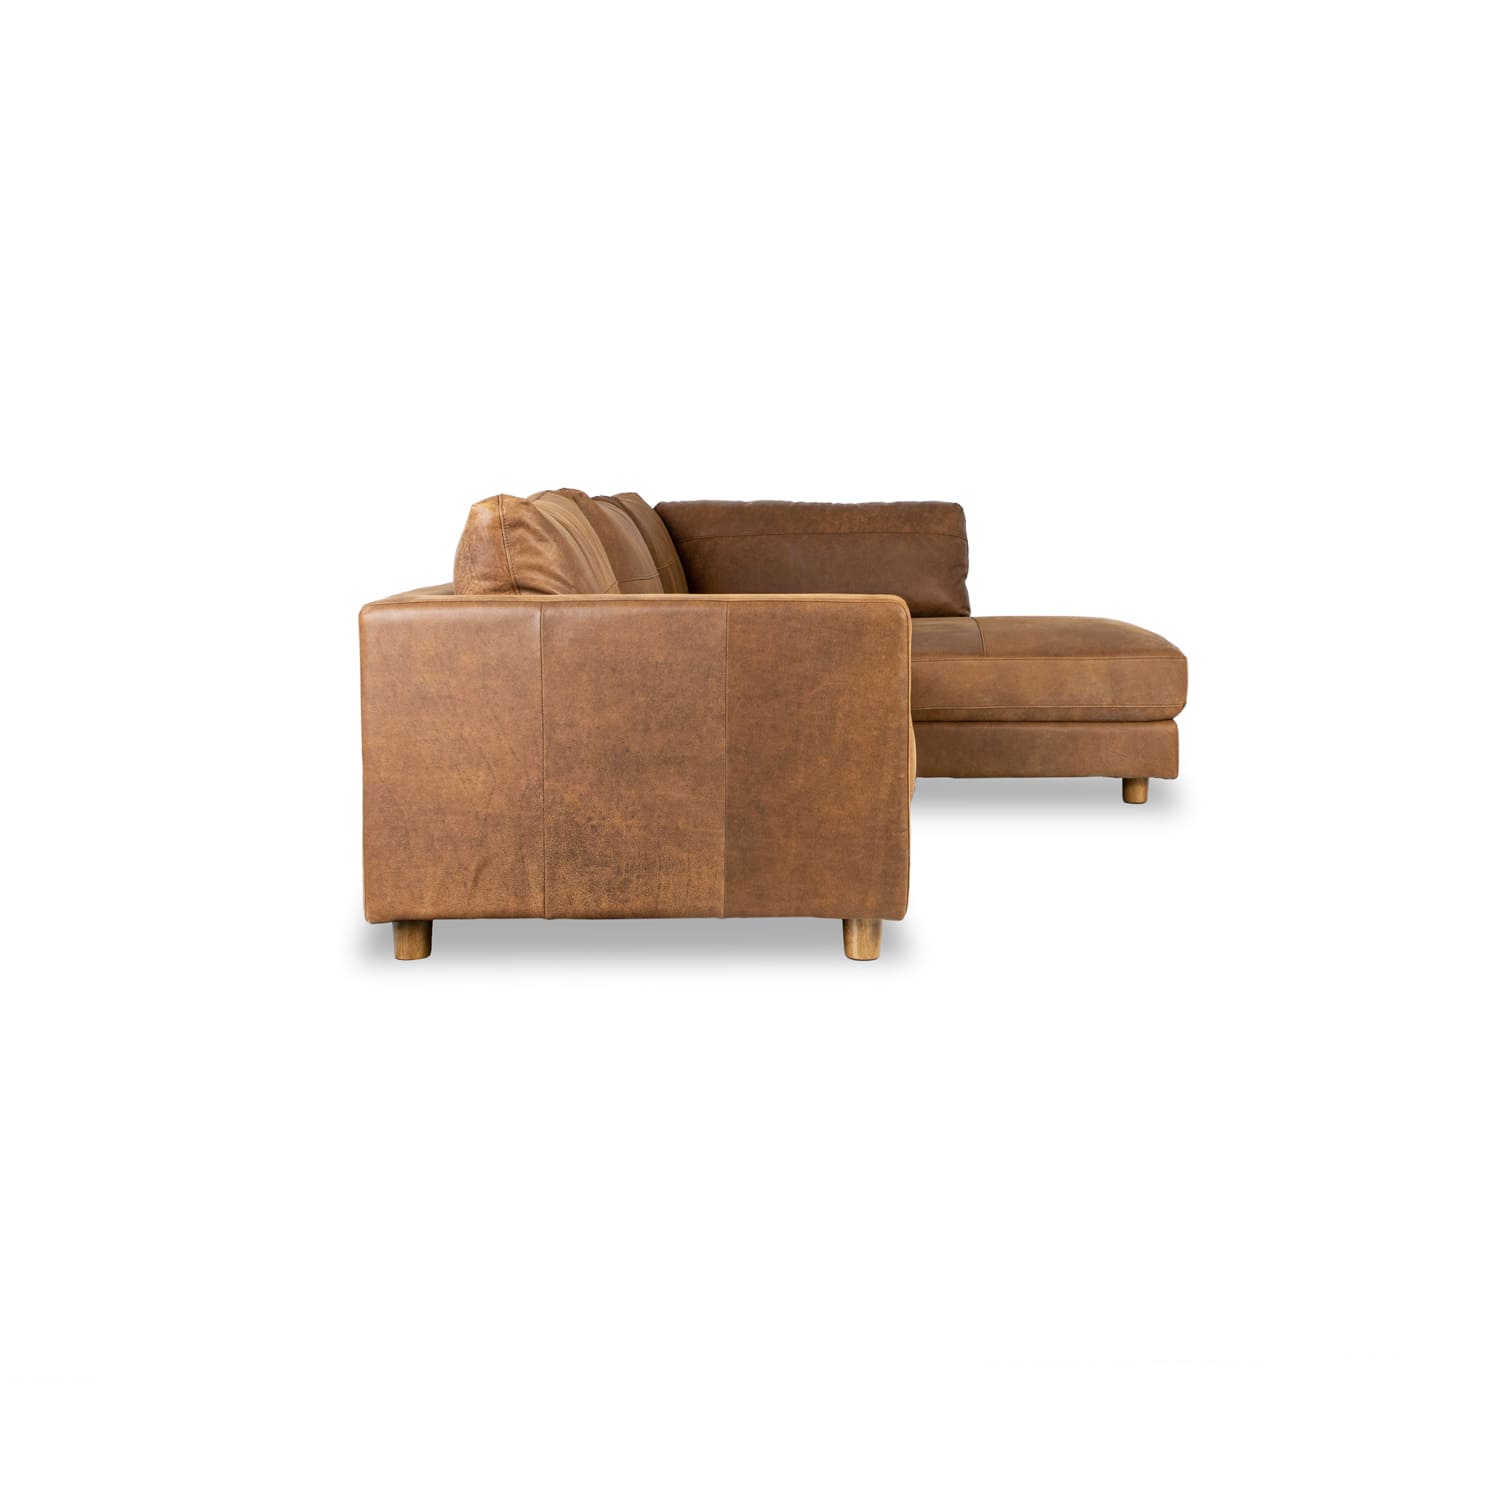 Barcelona Leather Right Side Facing Chaise Lounge